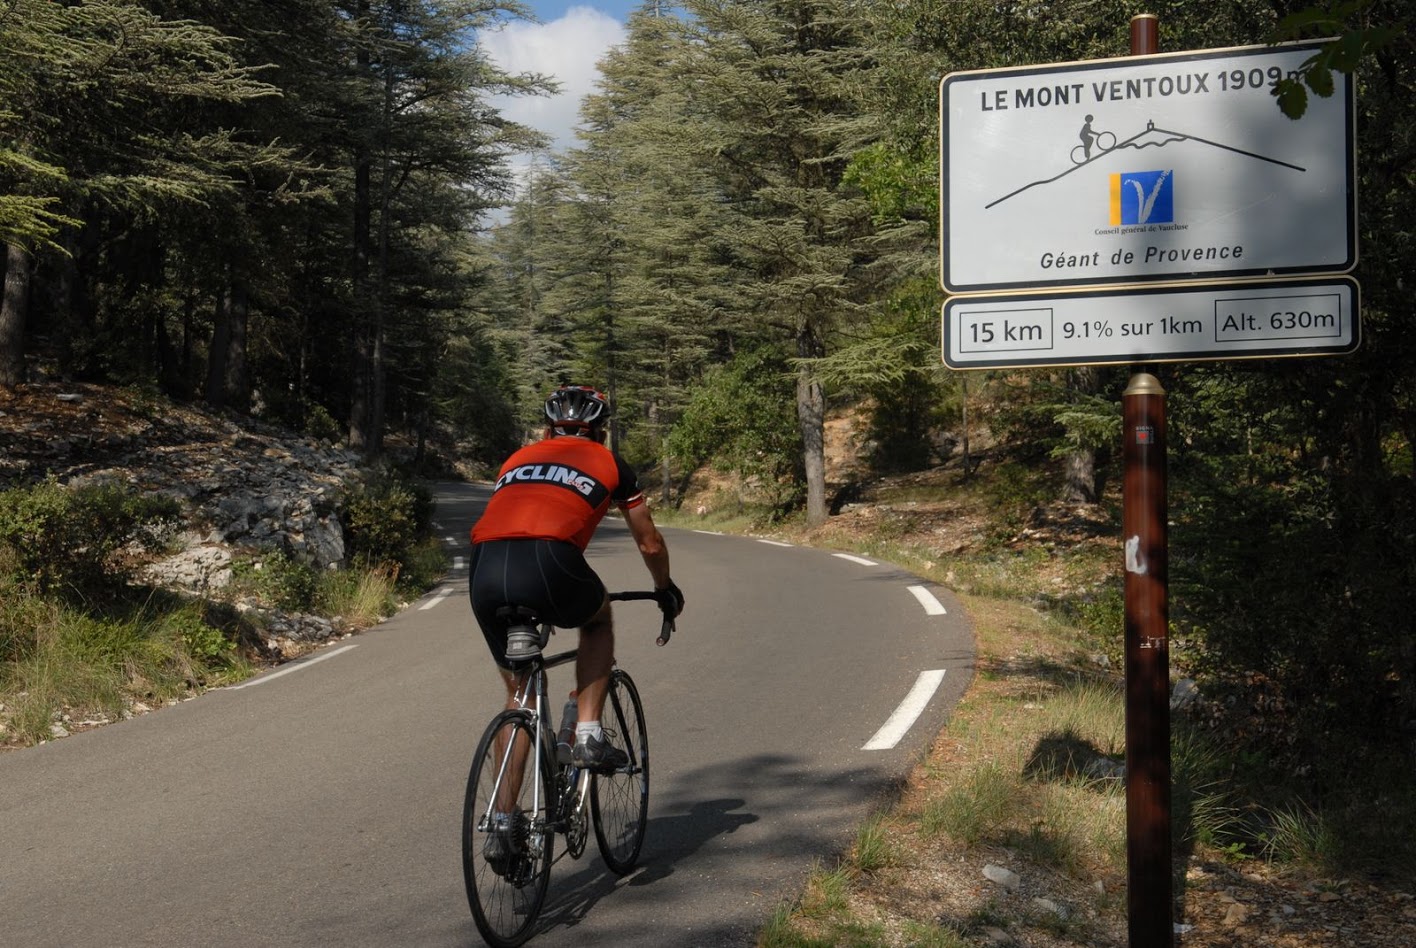 Cyclist at 630 meters in altitude